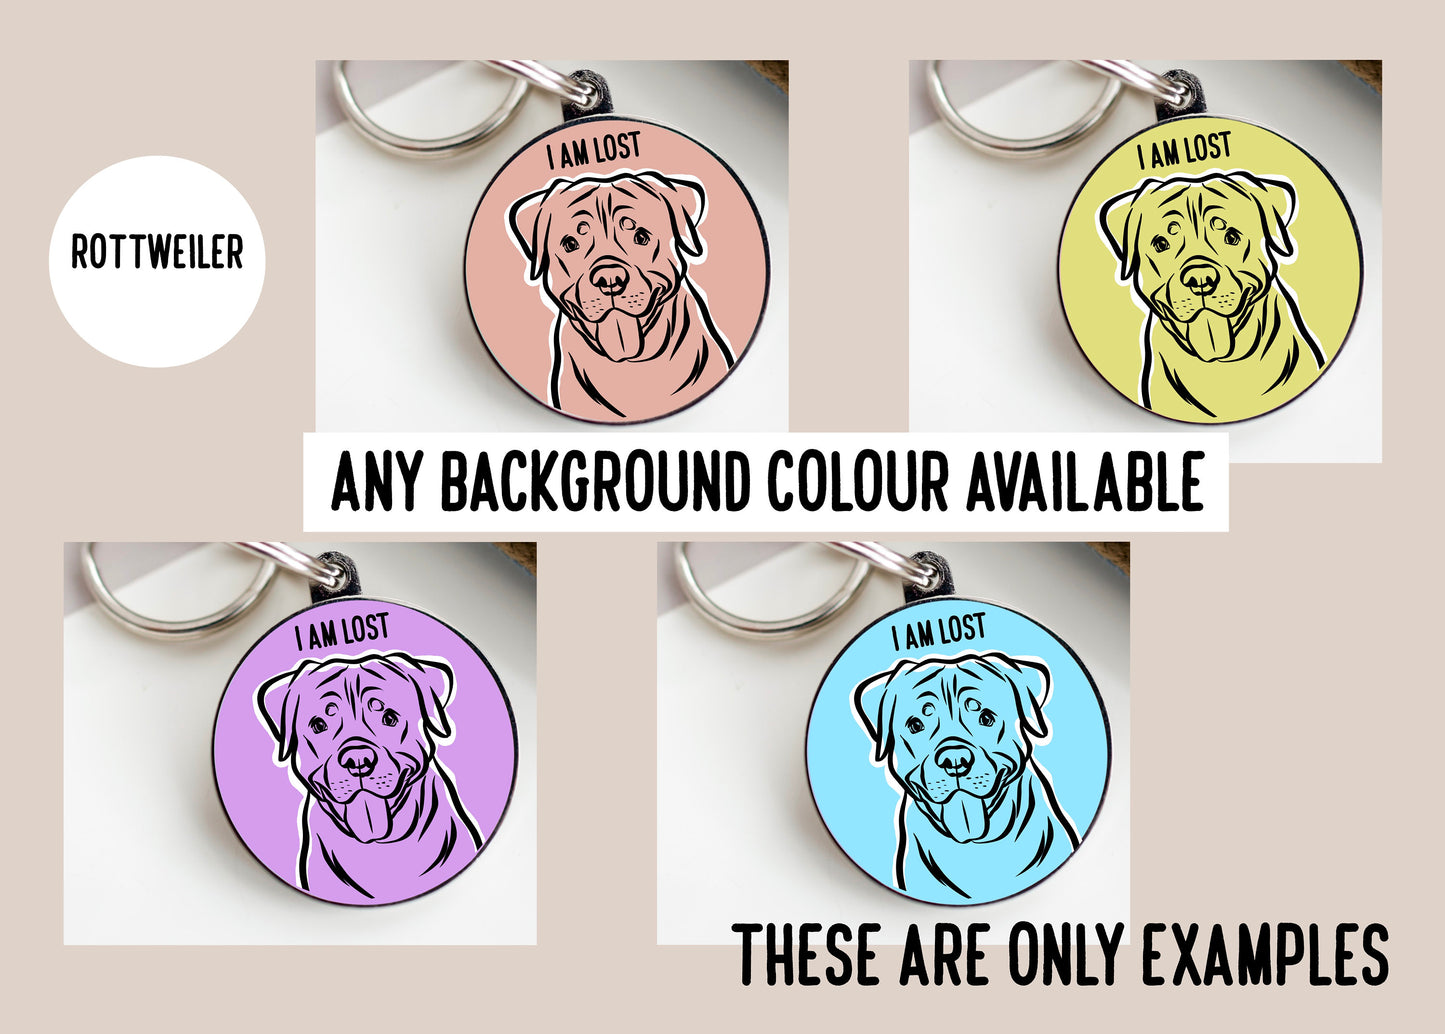 Rottweiler Outline ID Tag/ Personalised Circle ID Dog Tag/ Bespoke Rottweiler Portrait Owner Gift/ Pet Name Identify Tag/ Keepsake Gift